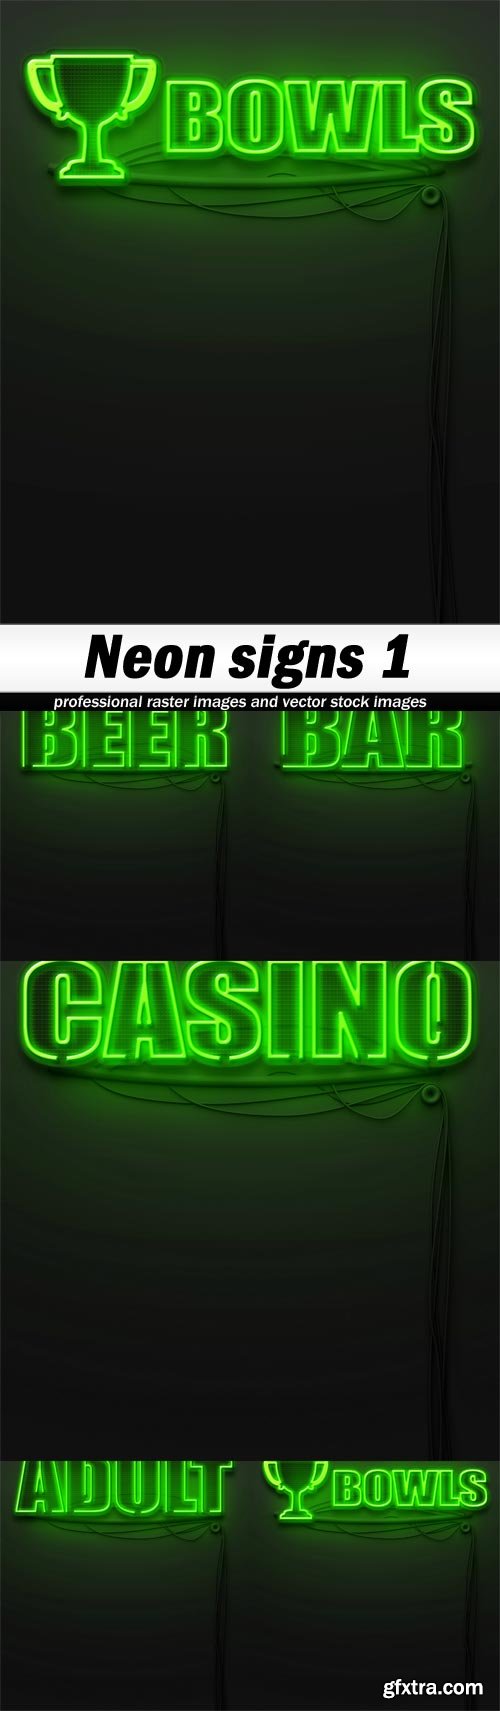 Neon signs 1